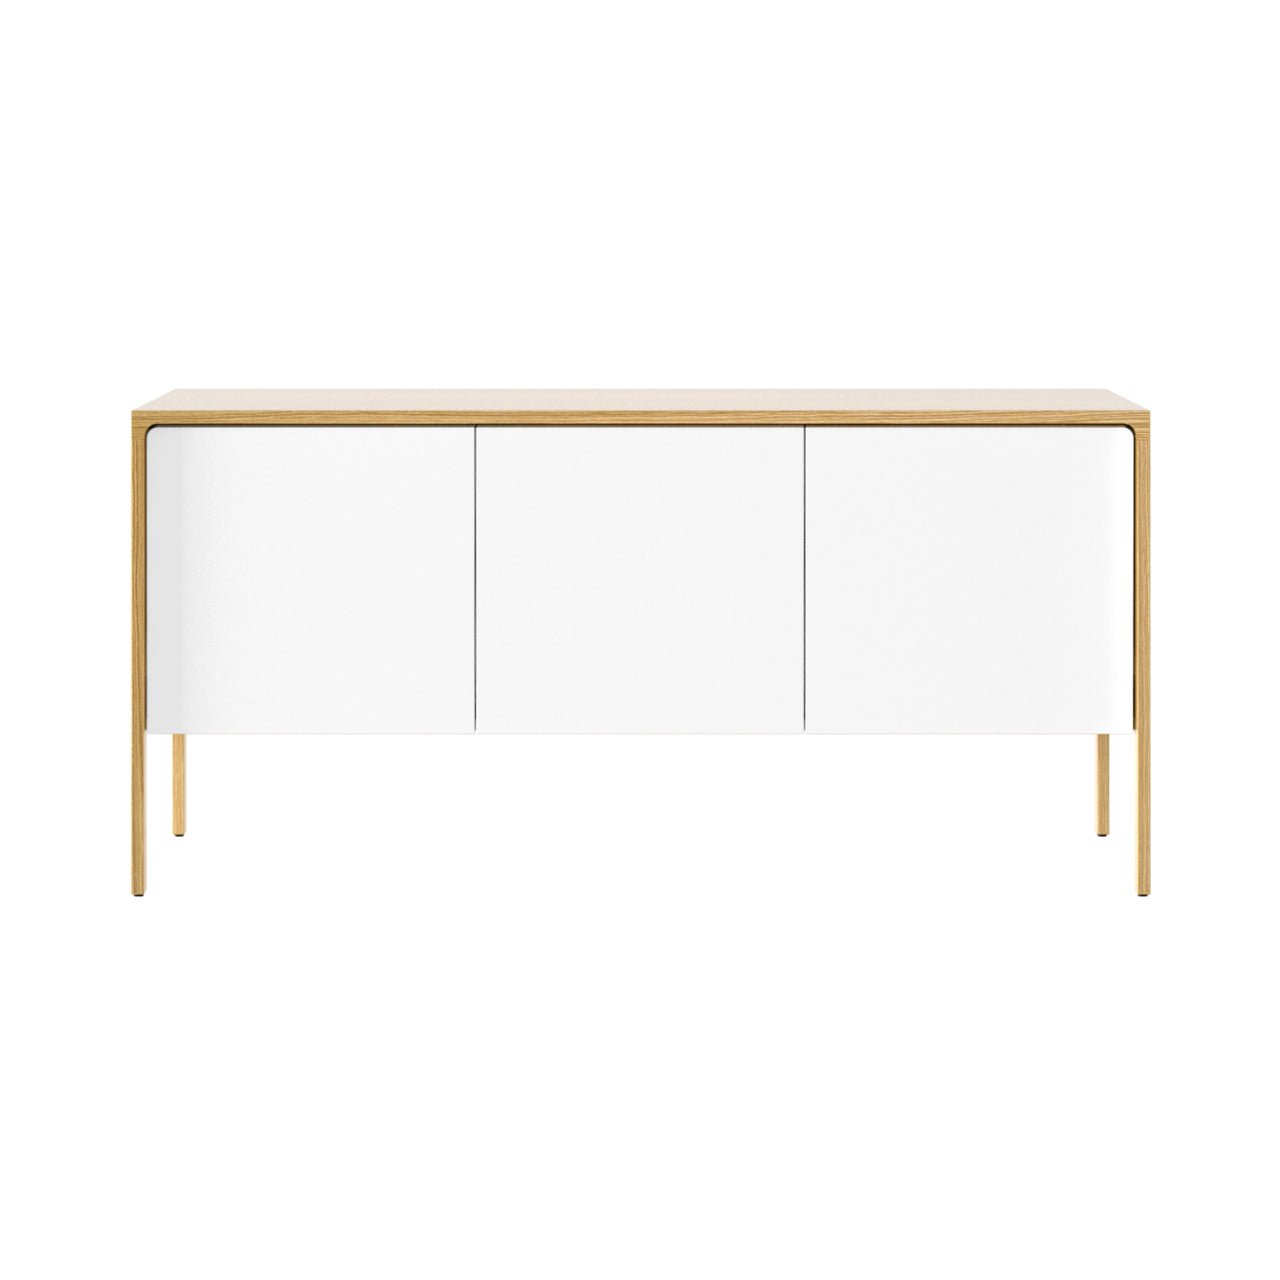 Tactile Sideboard: TAC210 + White Texturised Lacquered + Whitened Oak